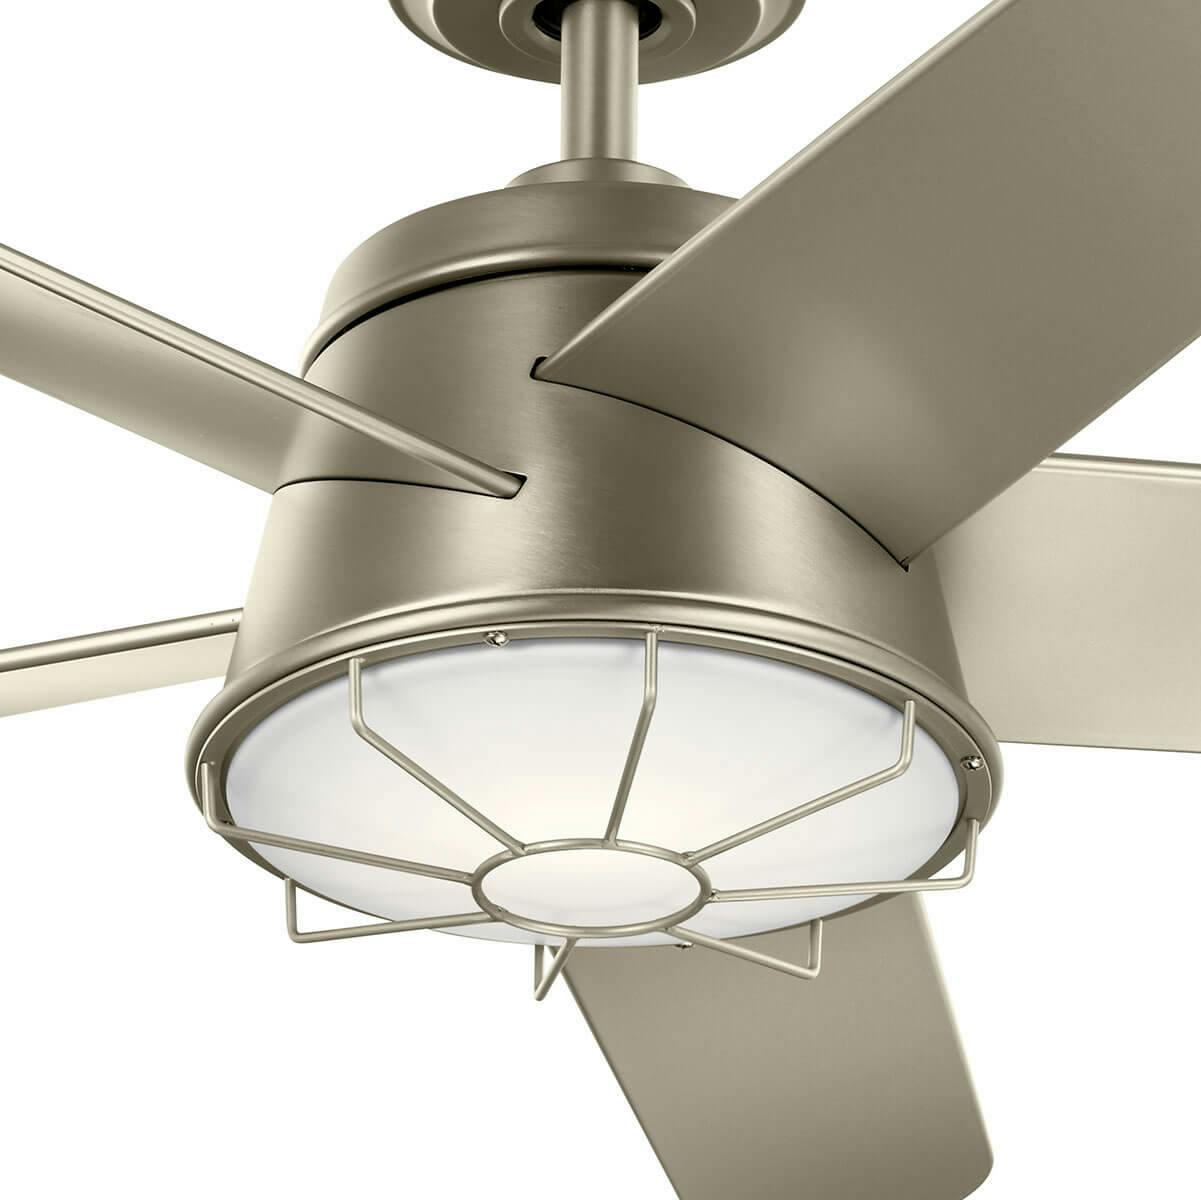 Close up view of the 54" Daya Ceiling Fan in Brushed Nickel on a white background